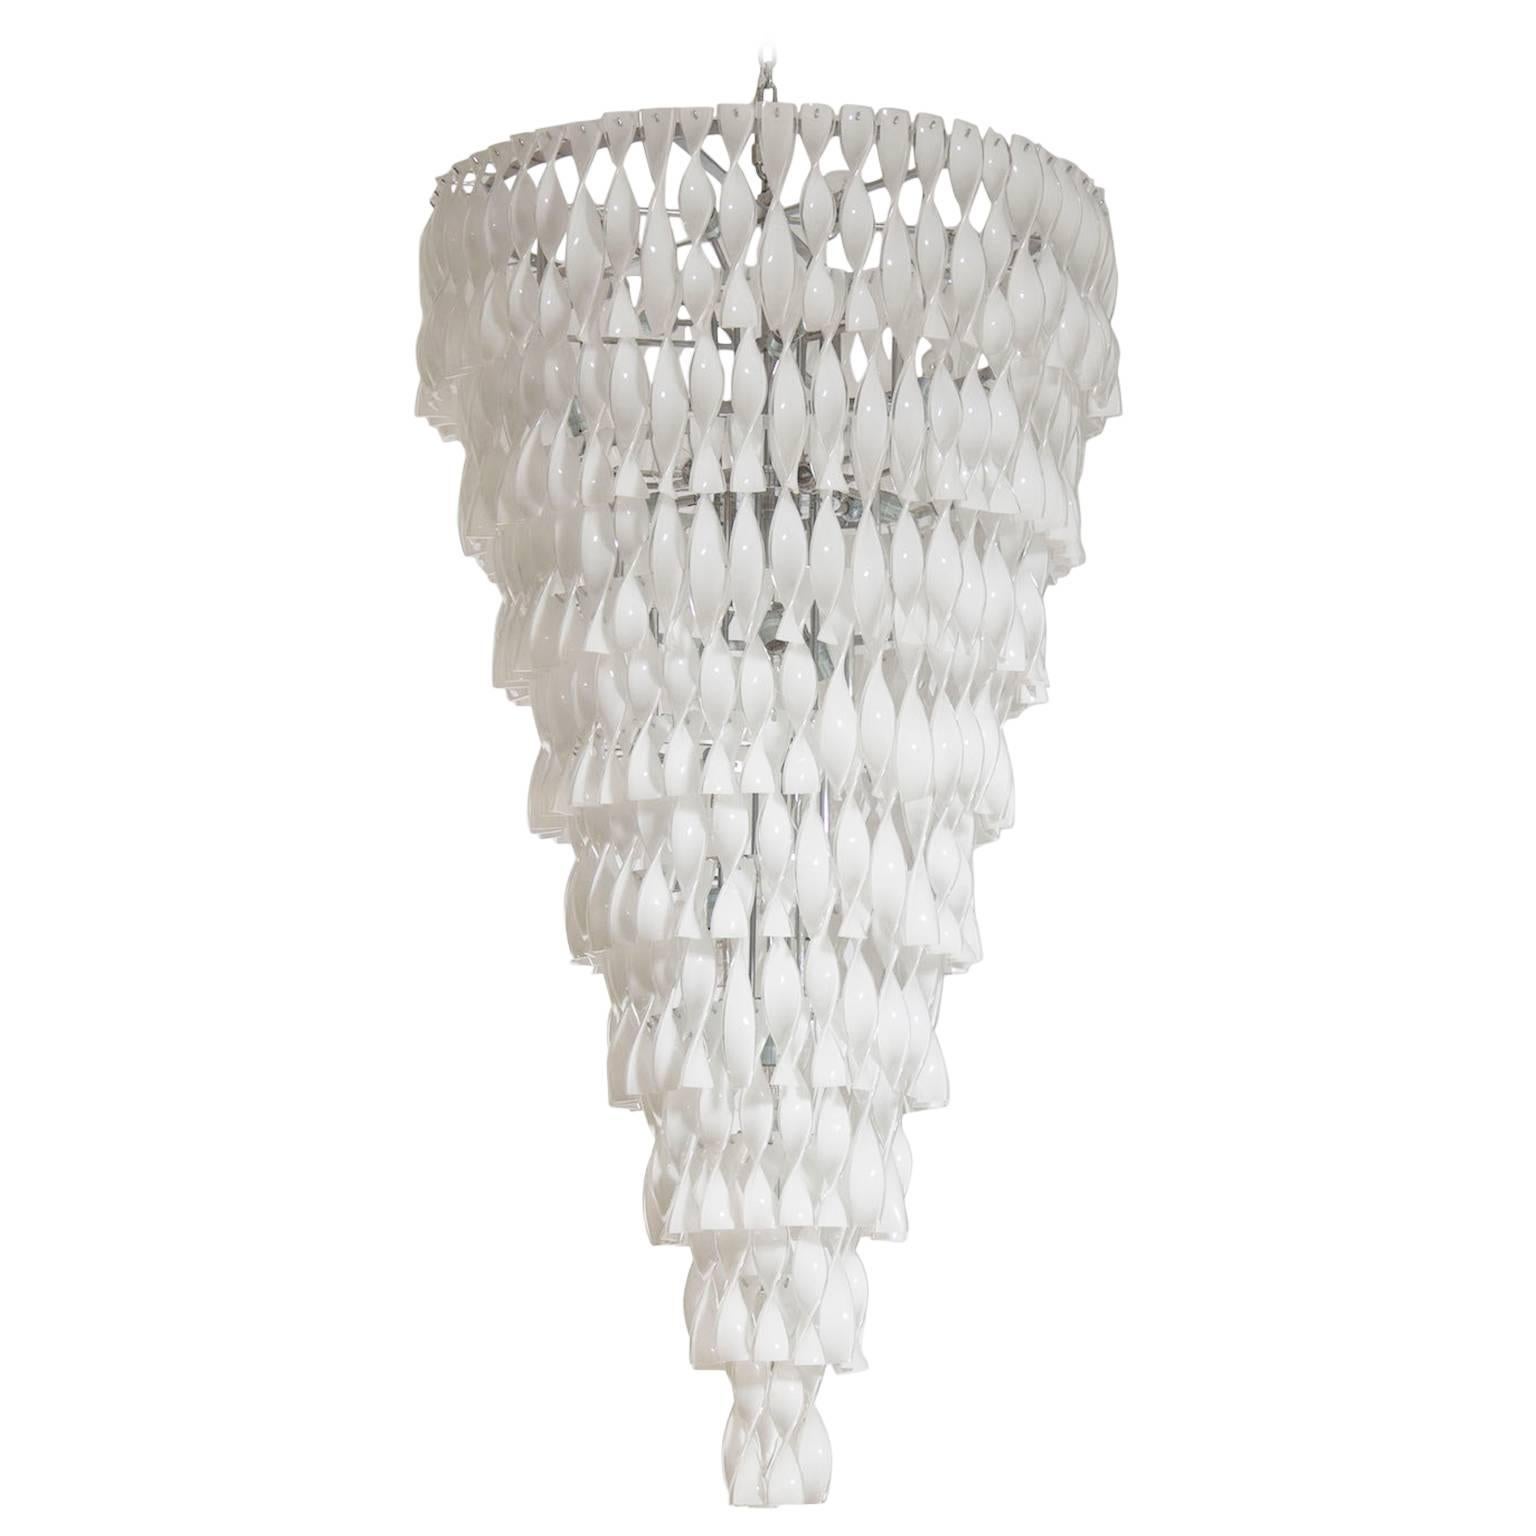 Italian Massive Chandelier in Blown Murano Glass with Twisted Elements, 1990s For Sale